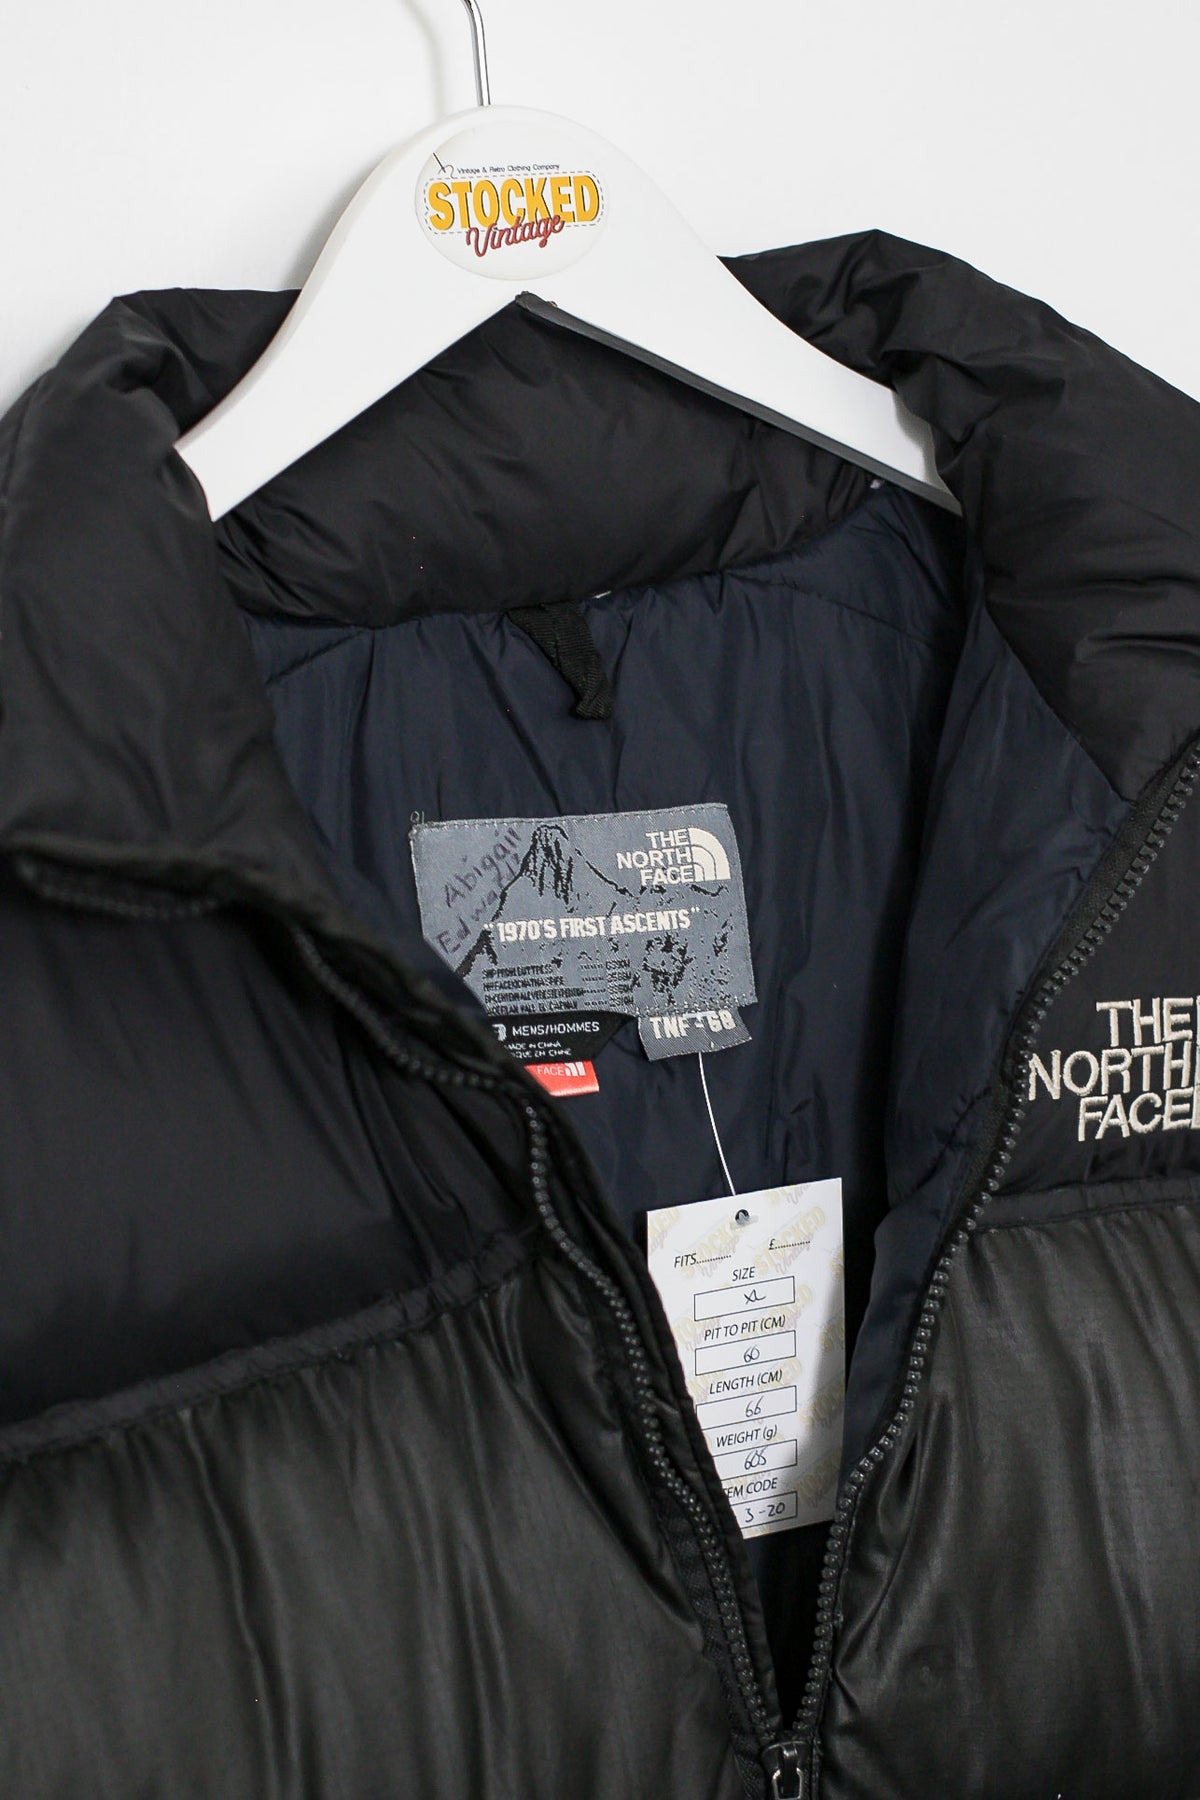 The North Face Gilet Puffer Jacket (M)